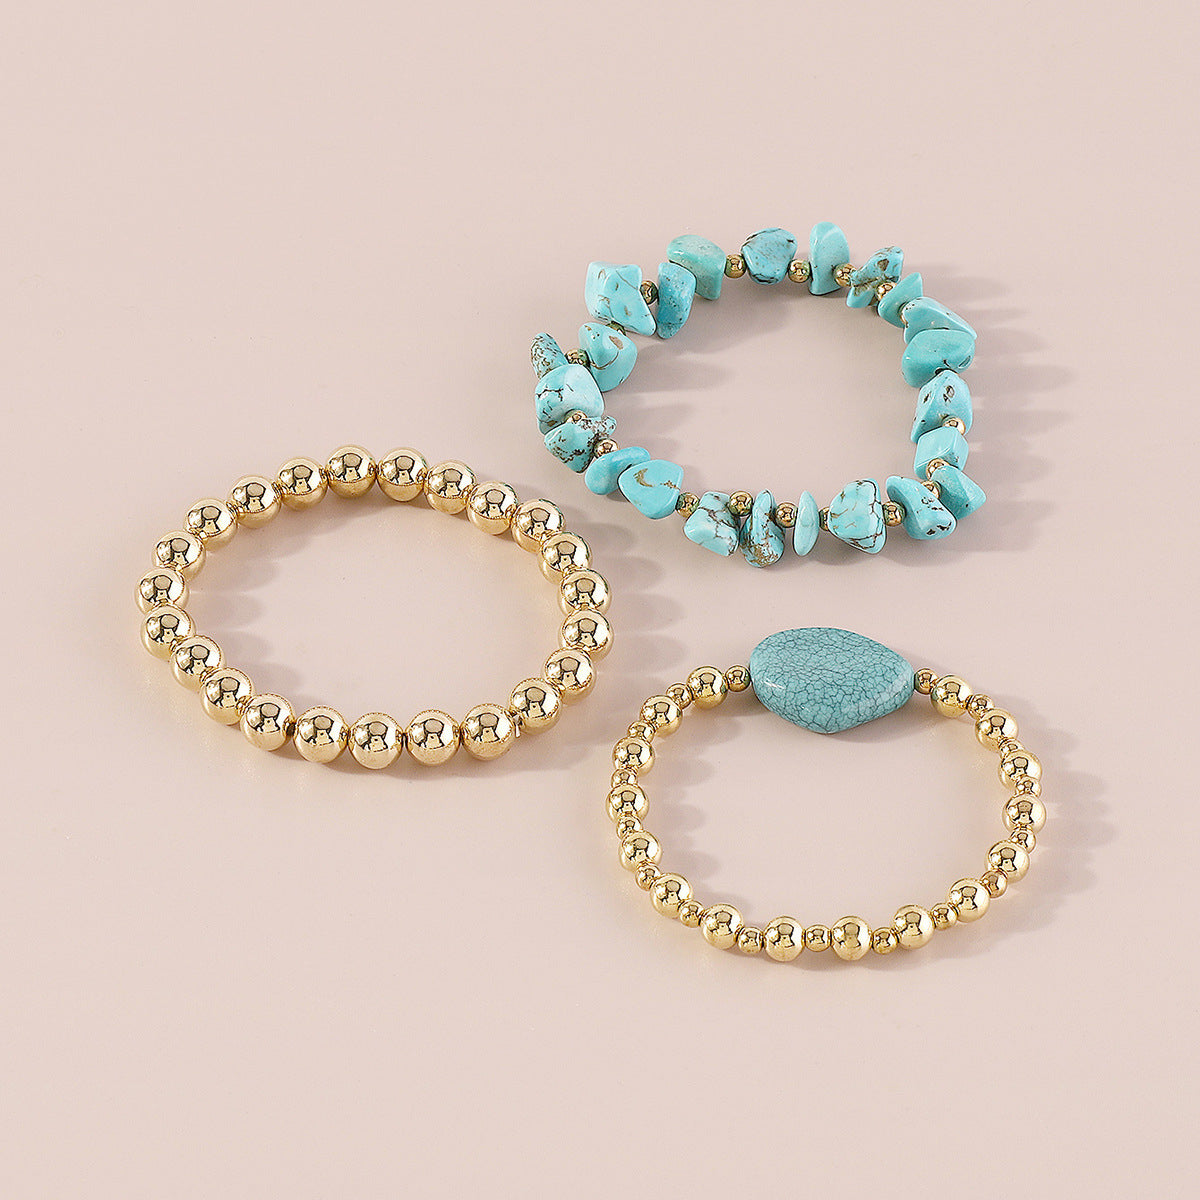 Turquoise & 18K Gold-Plated Bead Stretch Bracelet